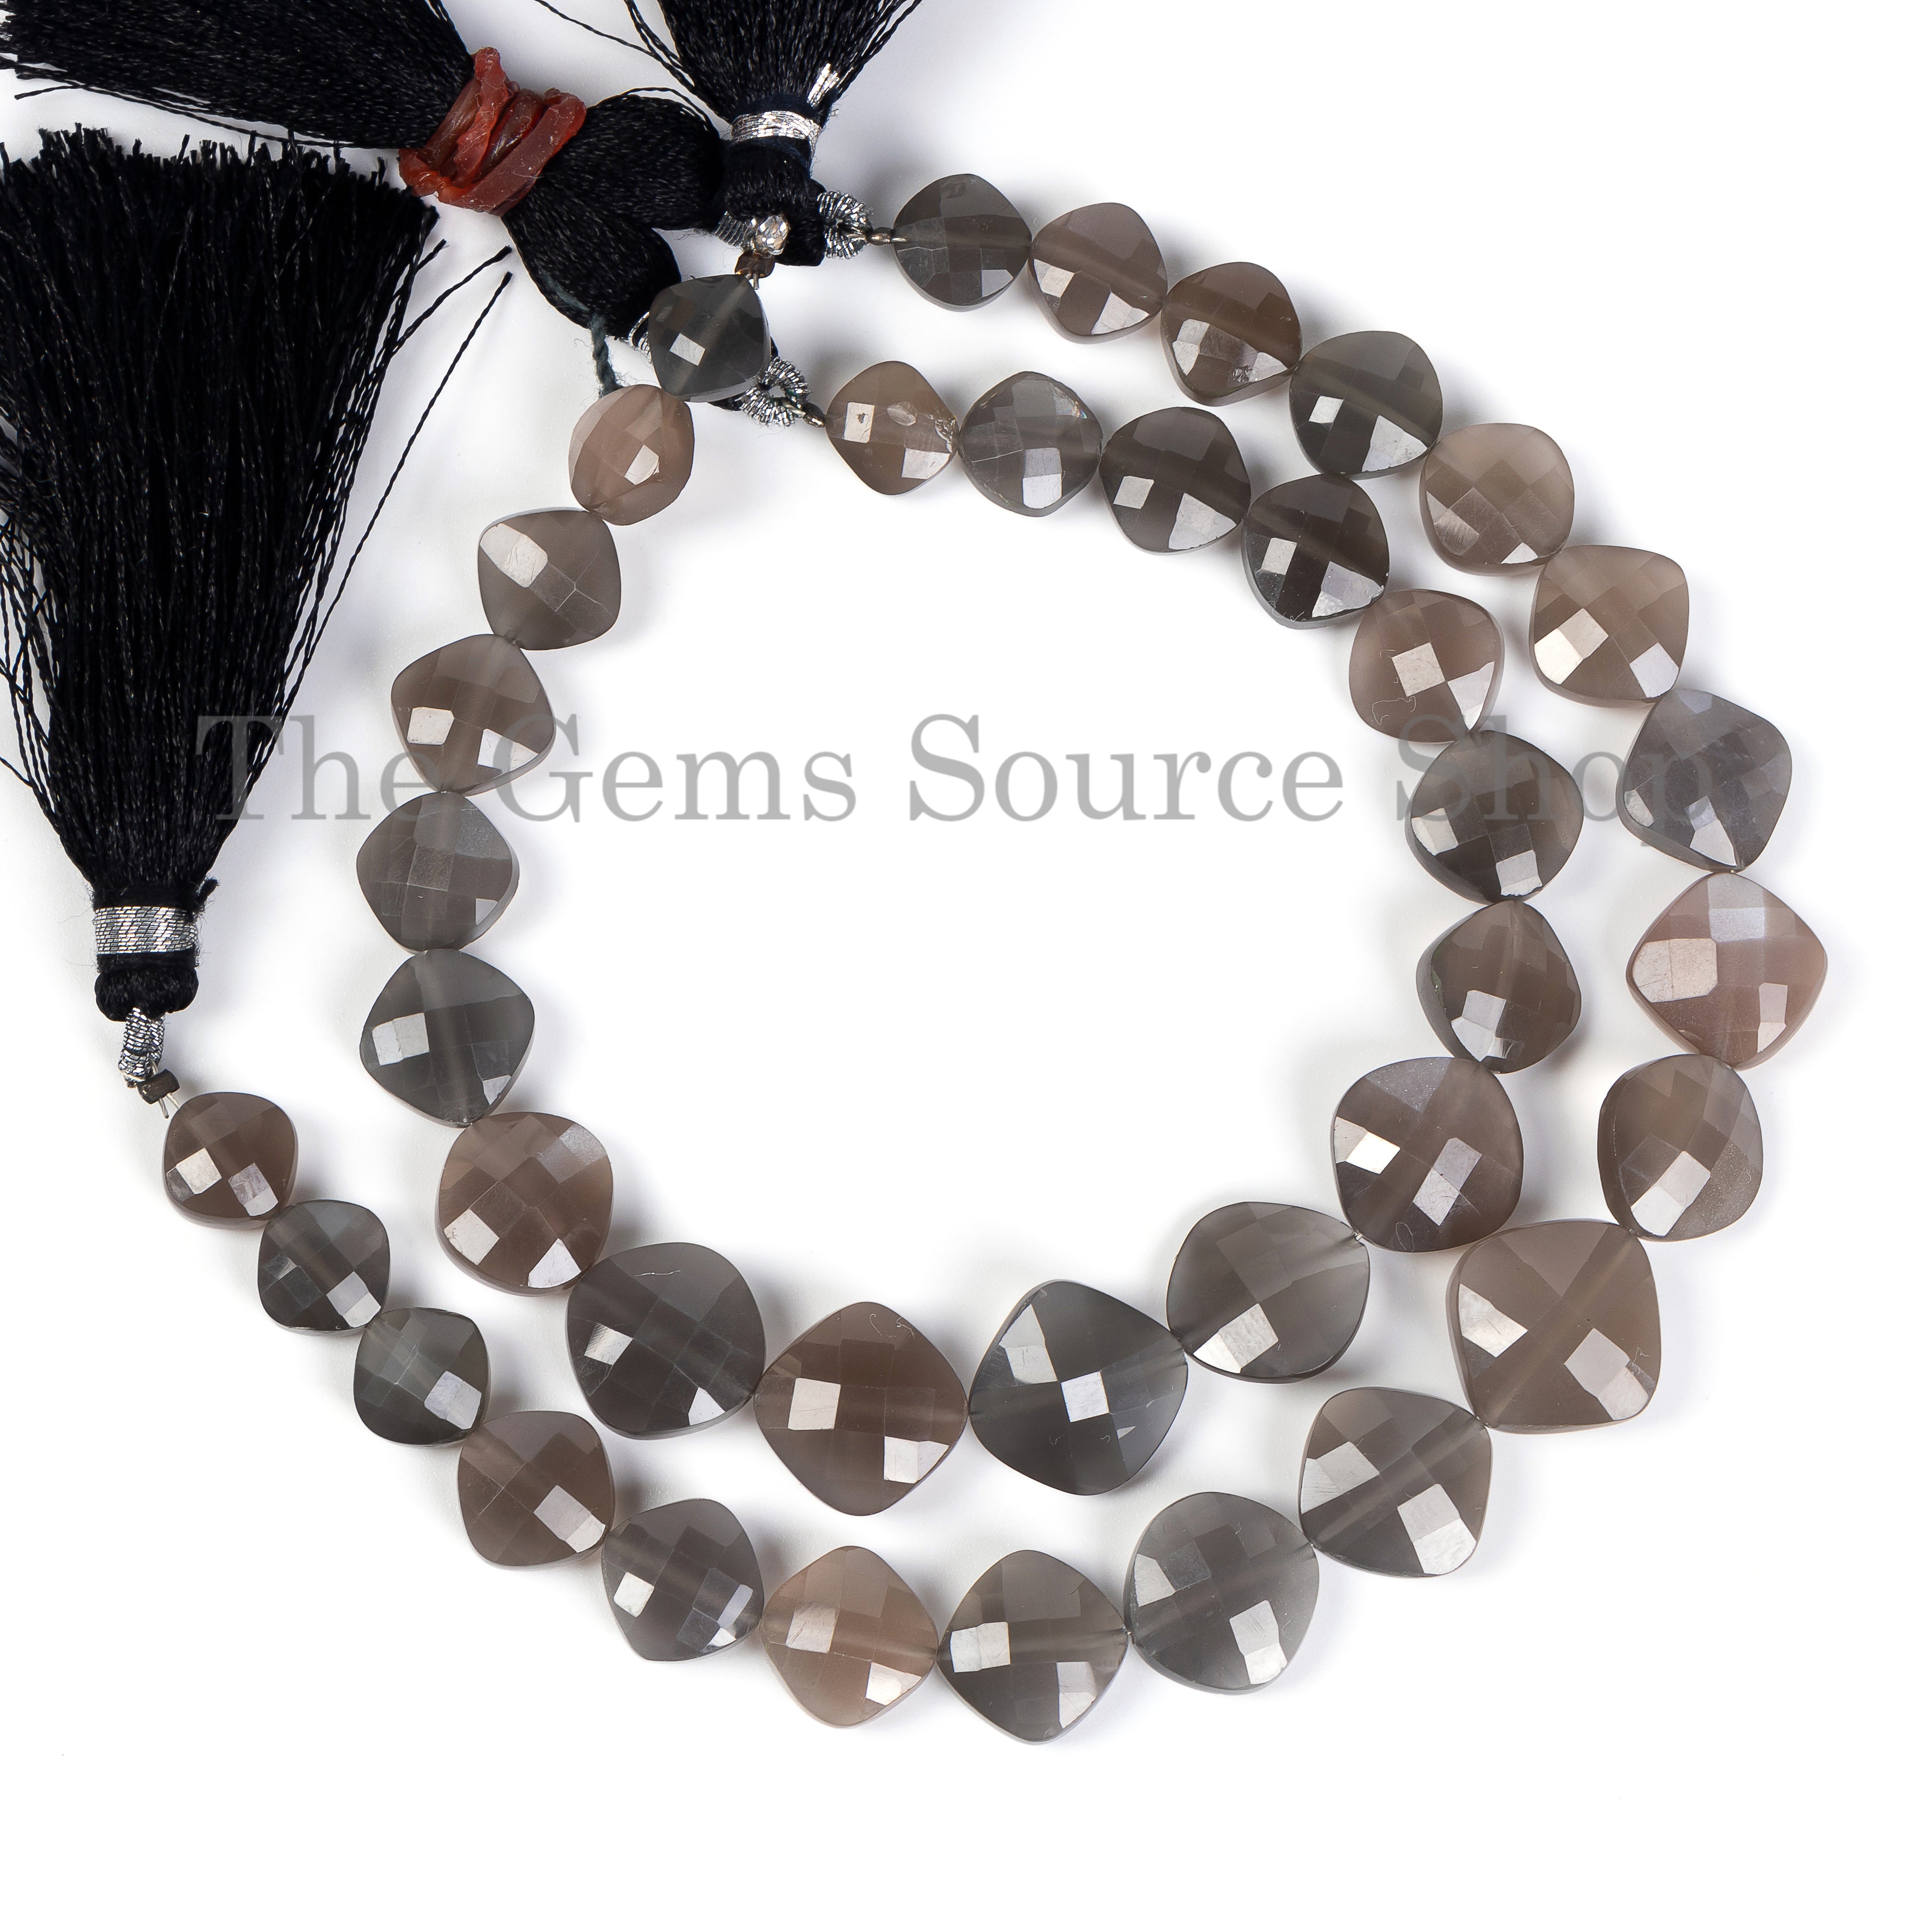 Natural Gray Moonstone Faceted Cushion Shape Gemstone Beads for Jewelry Making.TGS-5097